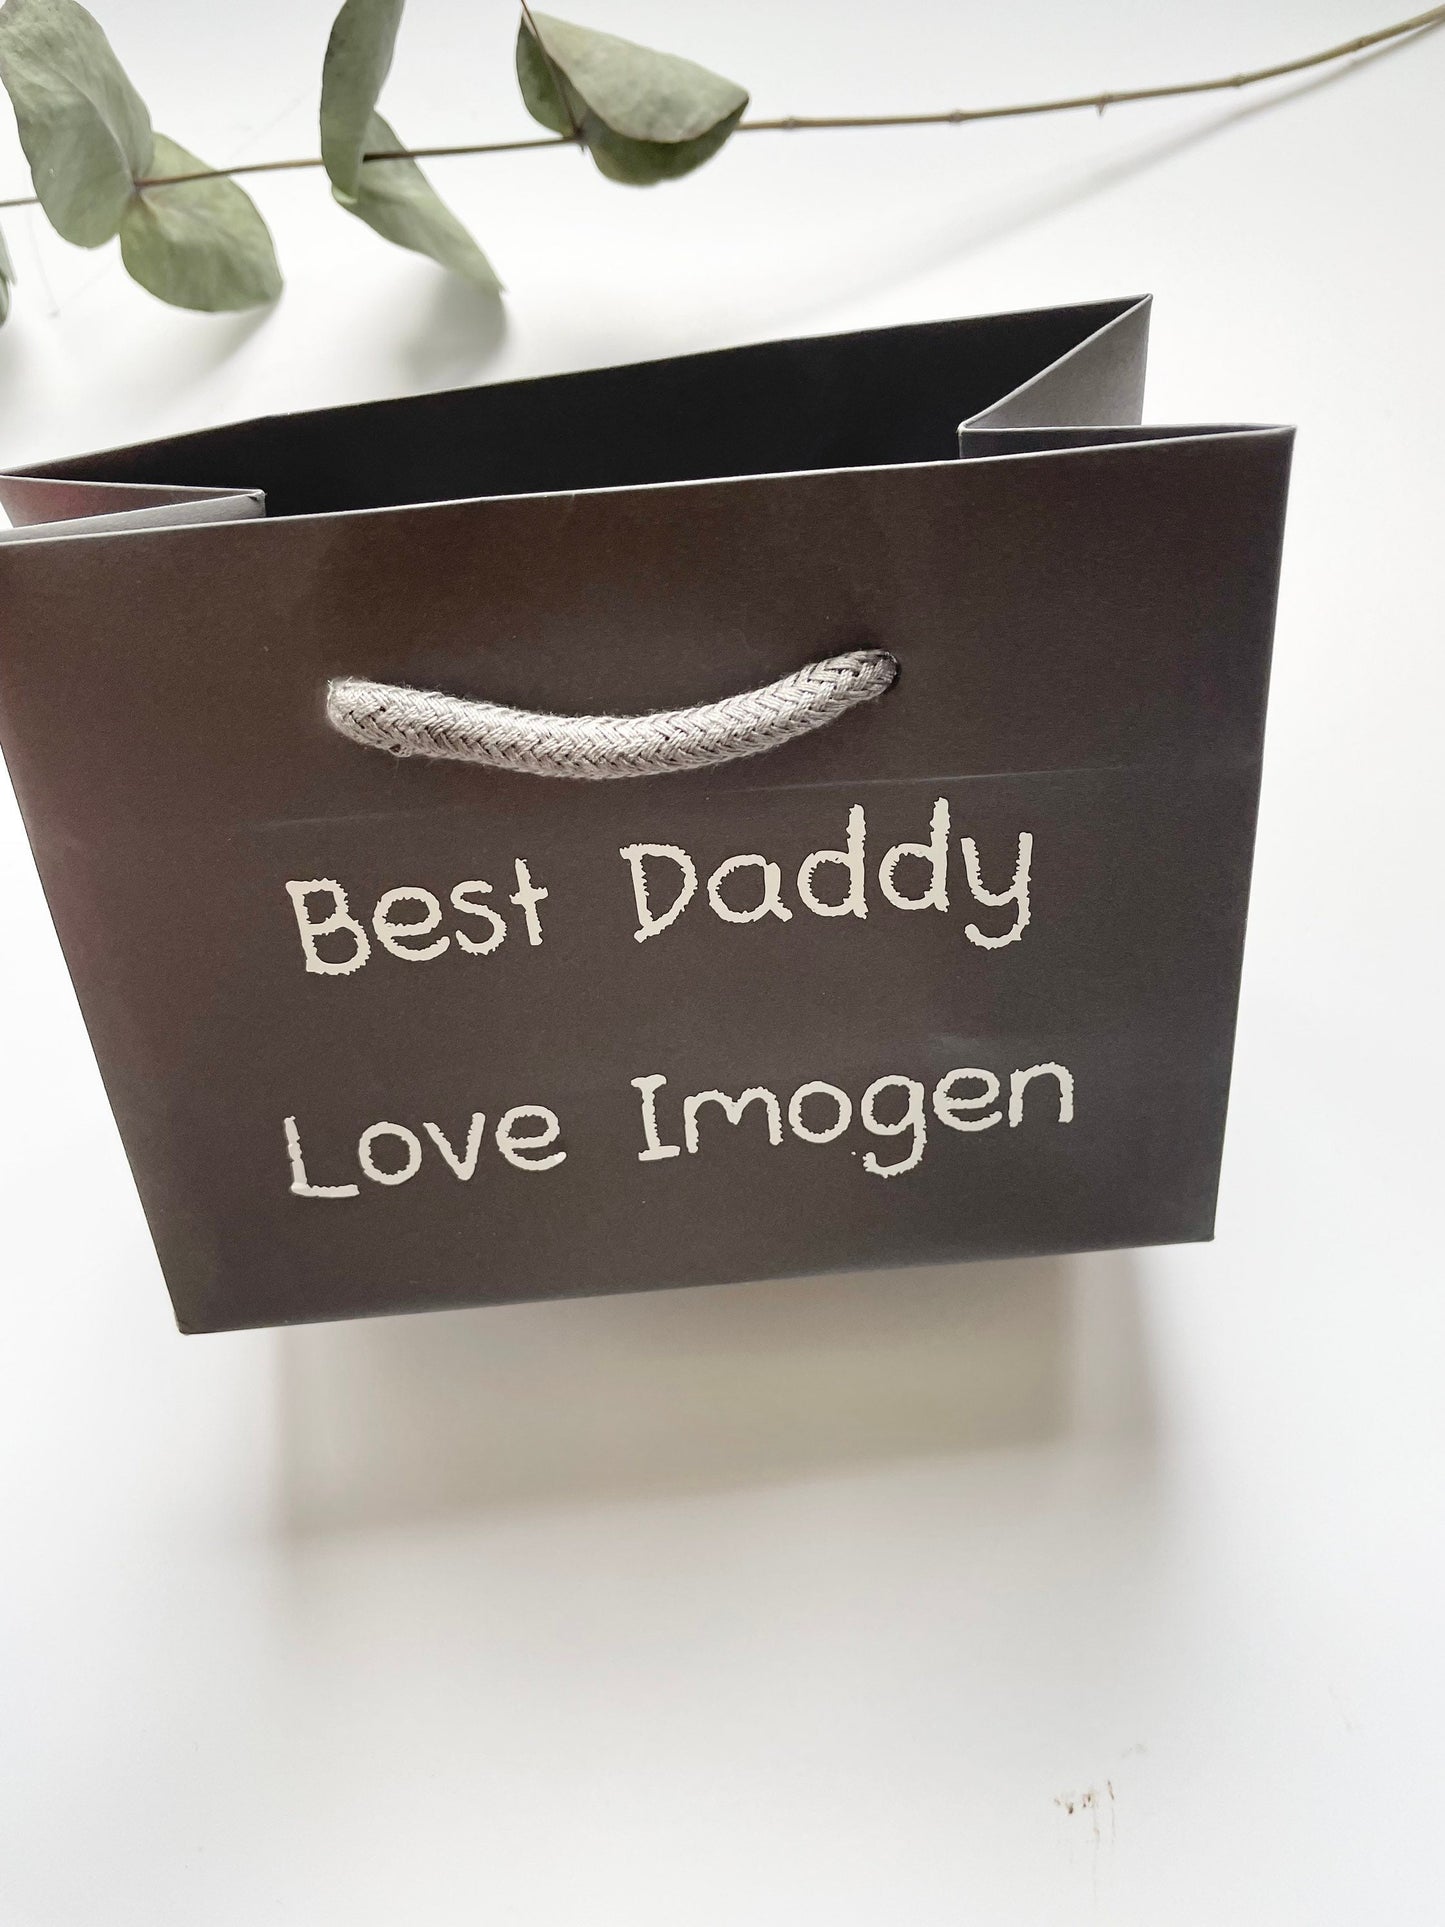 Best Daddy Gift Bag, Fathers day gift bag, fathers day gift, gift bag for dad, dad present, personalised dad gift bag, gift for dad,